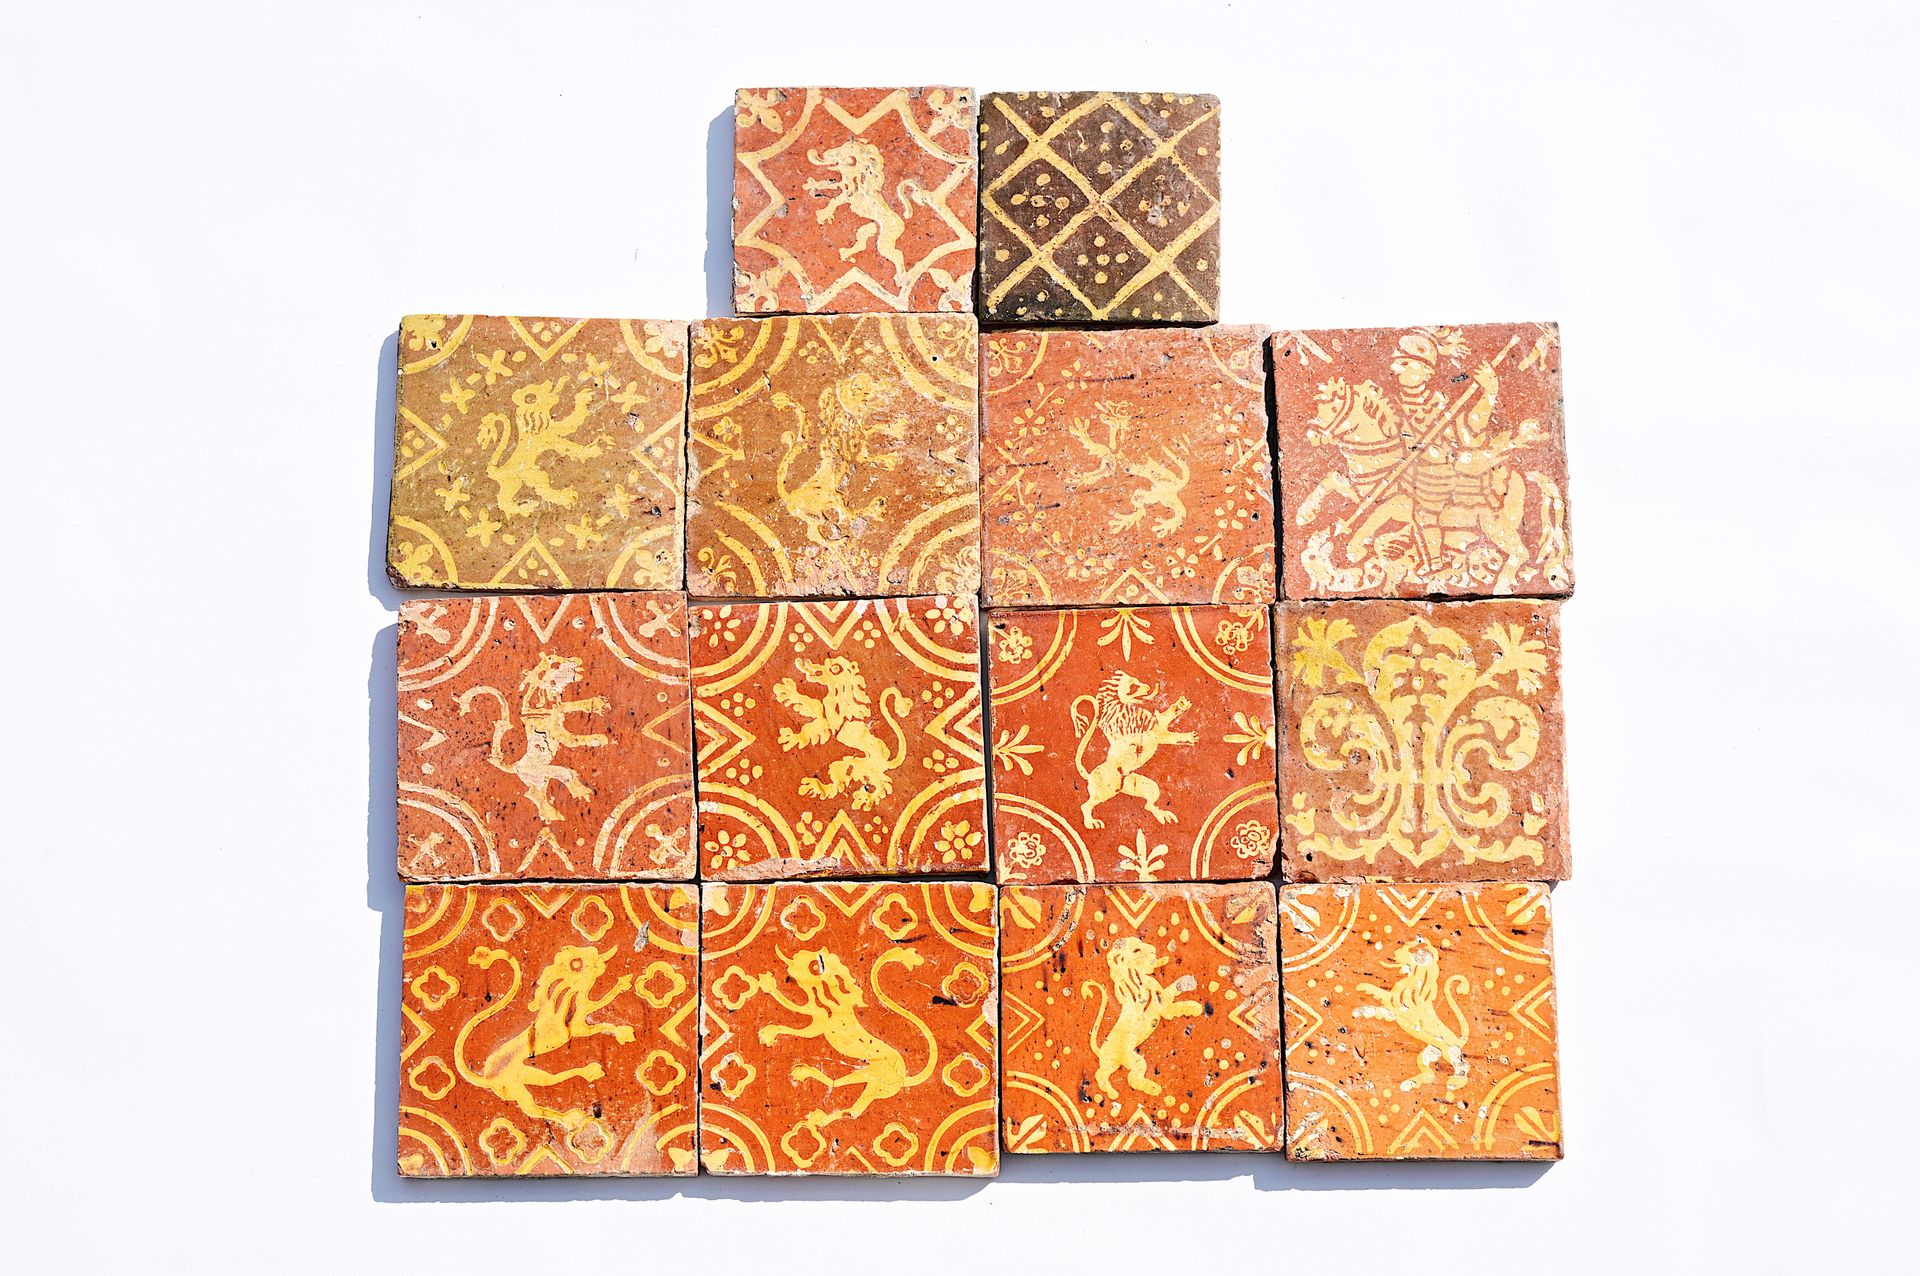 Fourteen Flemish decorated redware tiles in medieval style, 18th/19th C. Quattor&hellip;